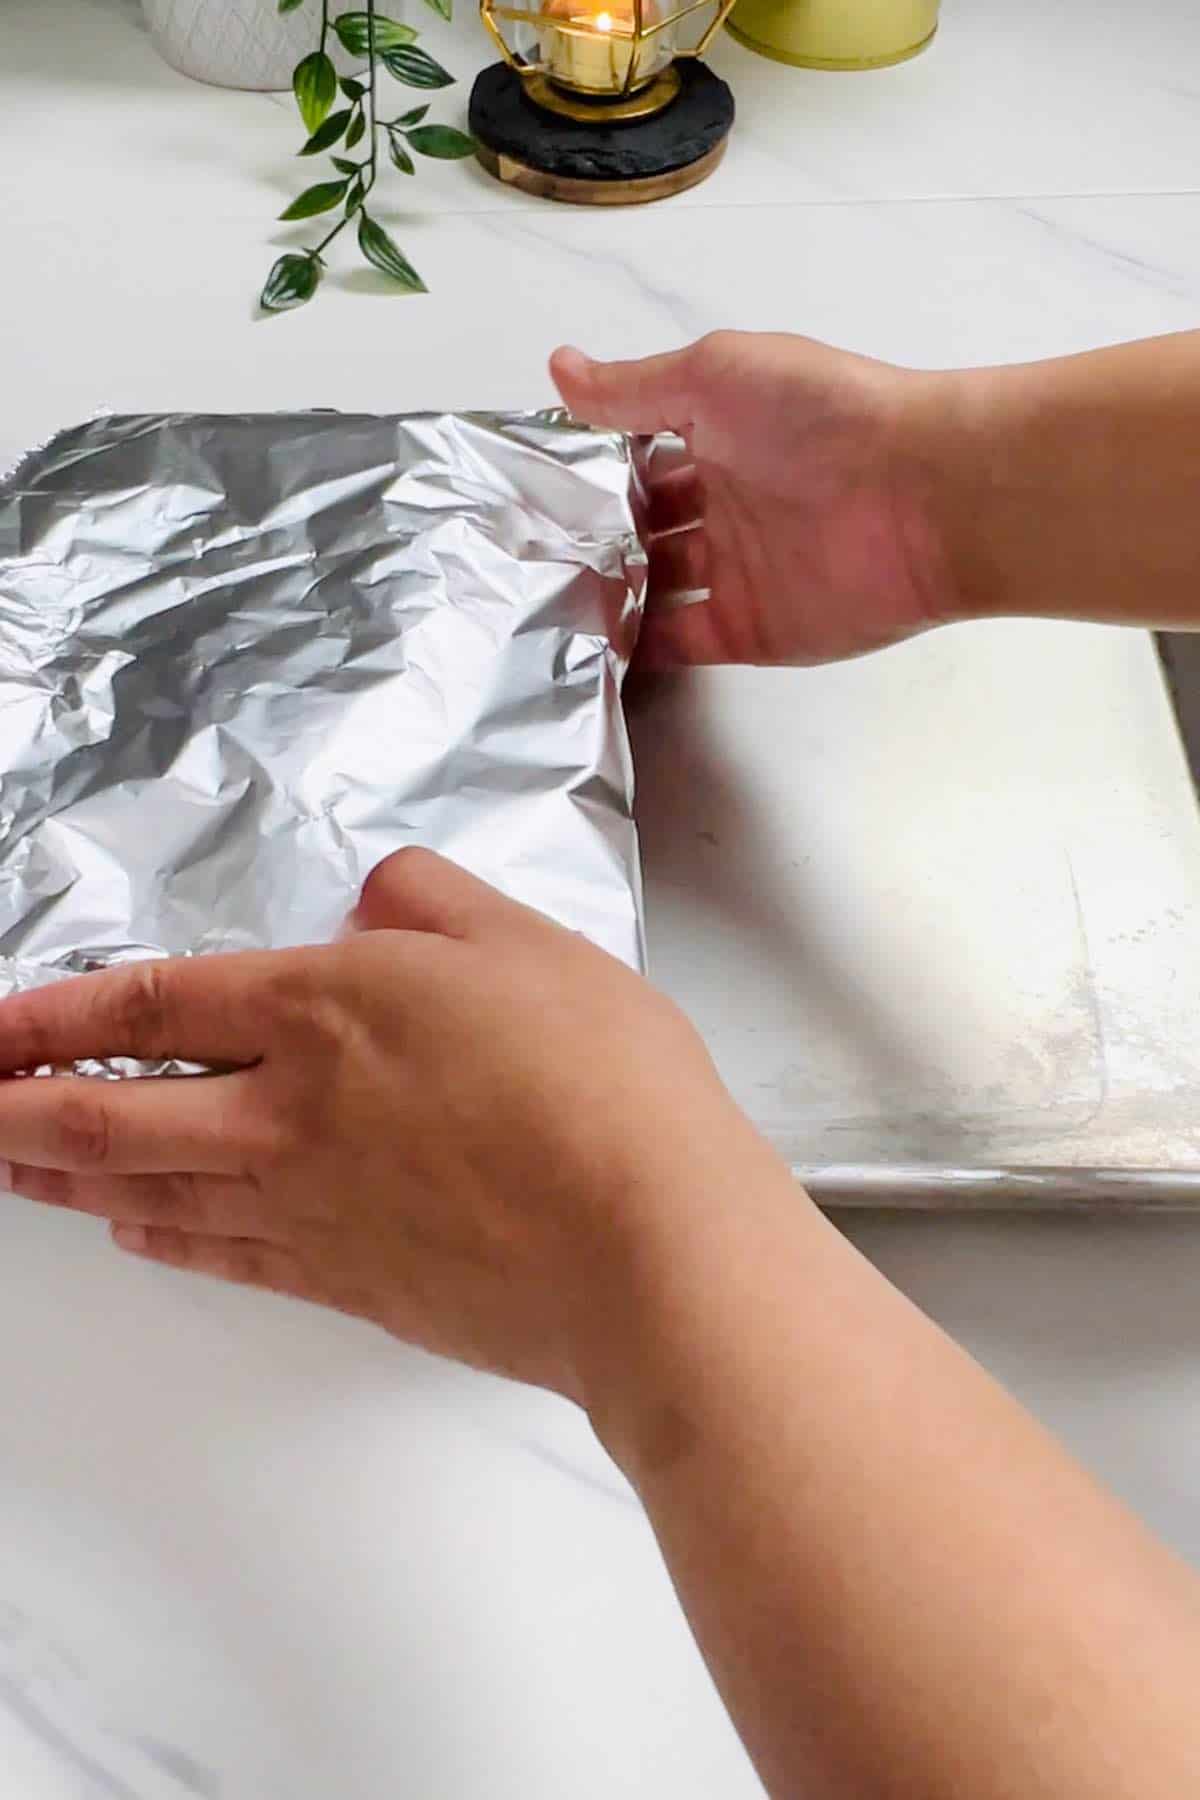 putting foil packets on a baking sheet